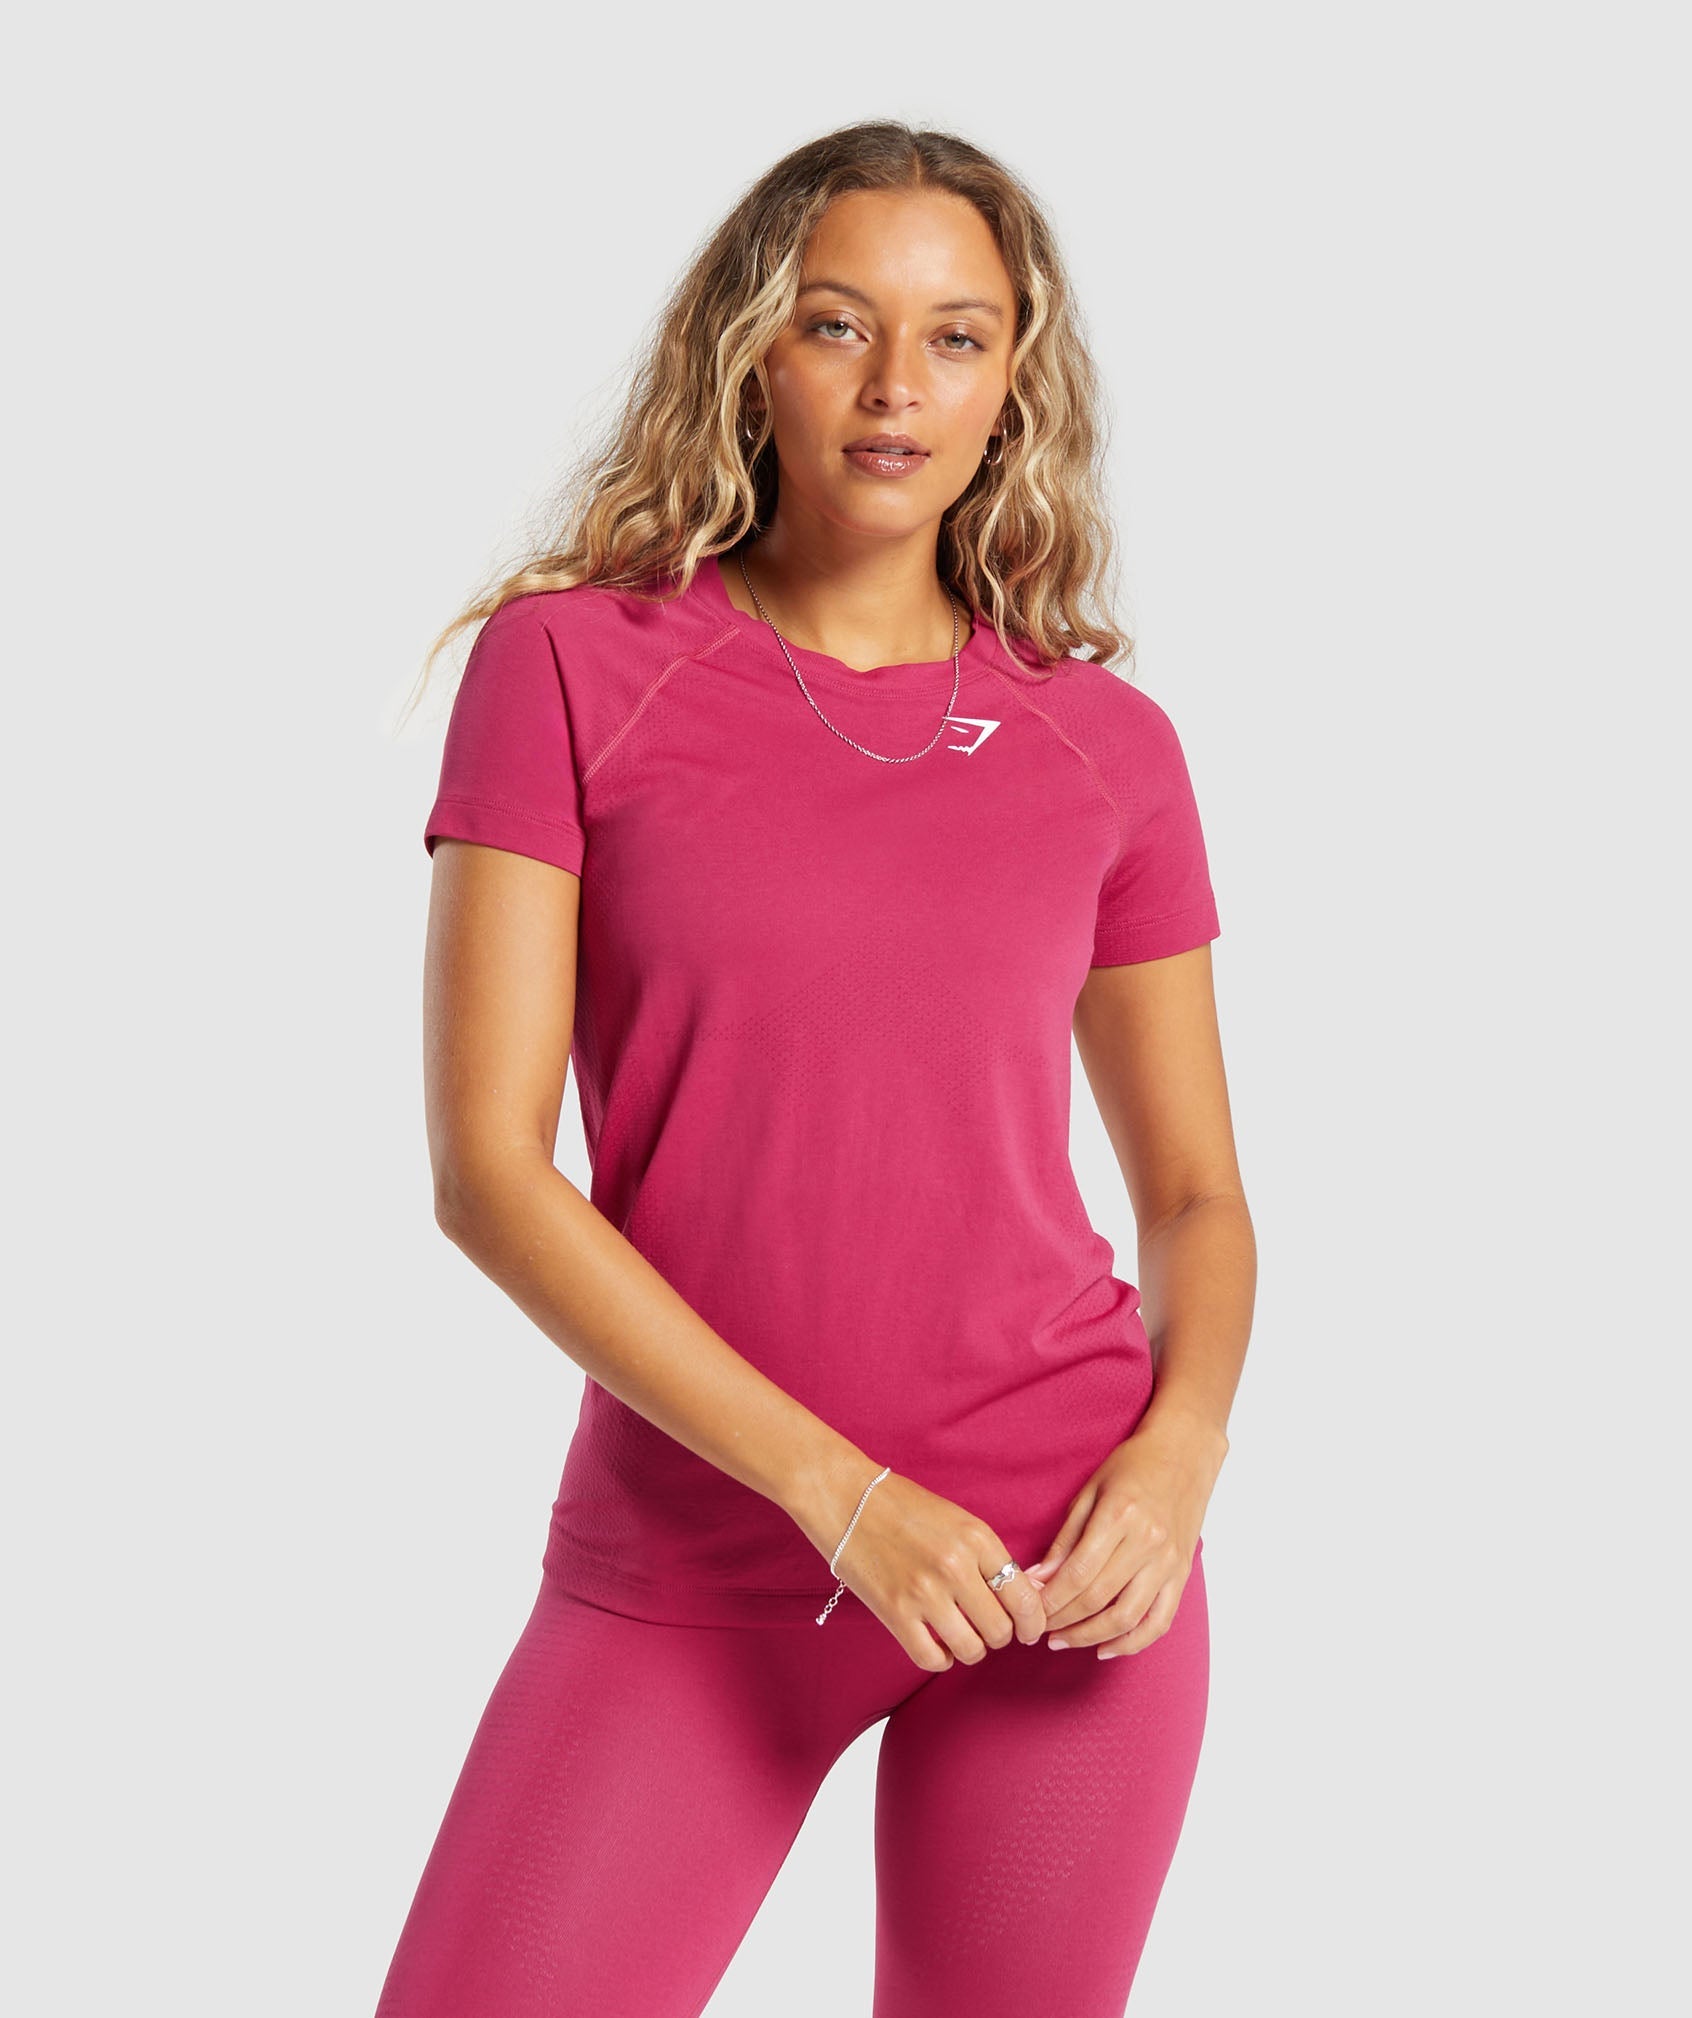 Vital Seamless 2.0 Light T-Shirt in Vintage Pink/Marl is out of stock